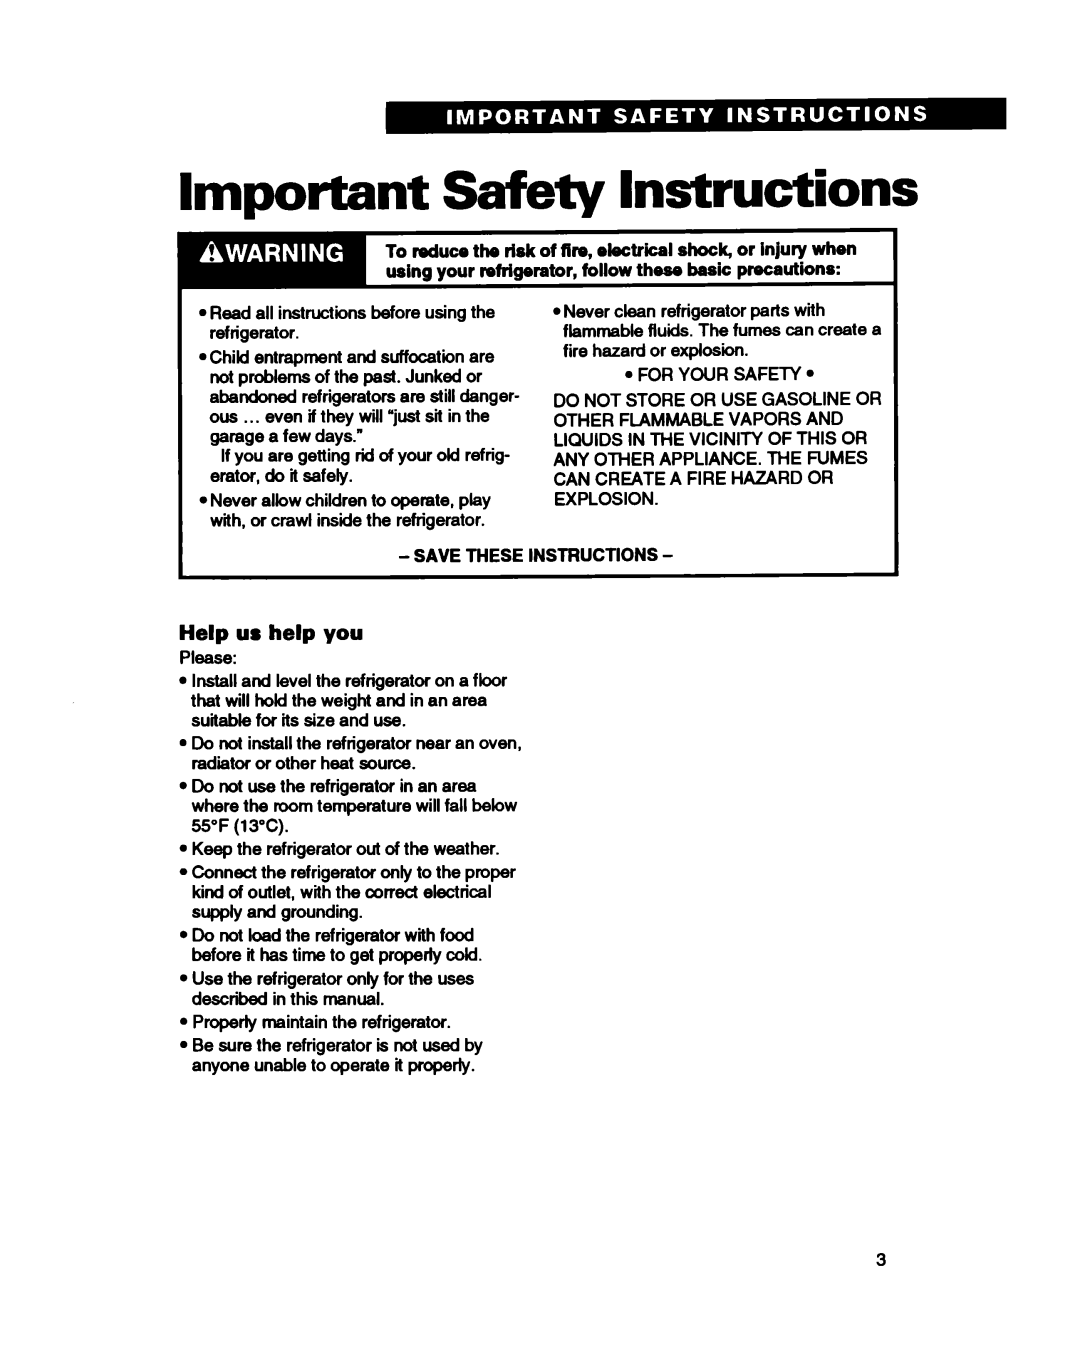 Estate TS25AQ warranty Important Safety Instructions, Help us help you, Save These Instructions 